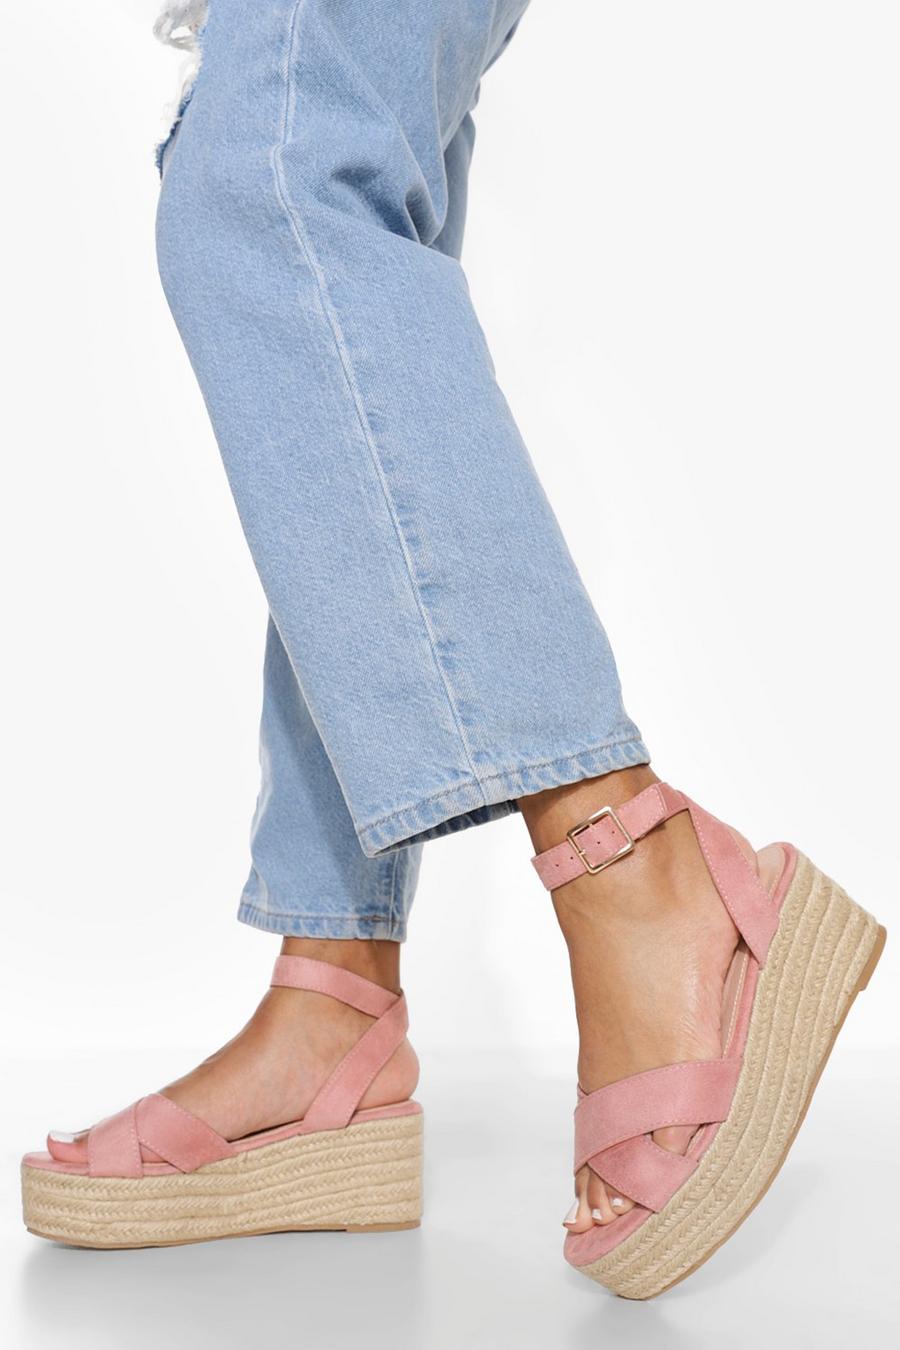 Blush pink Crossover Ankle Strap Wedge